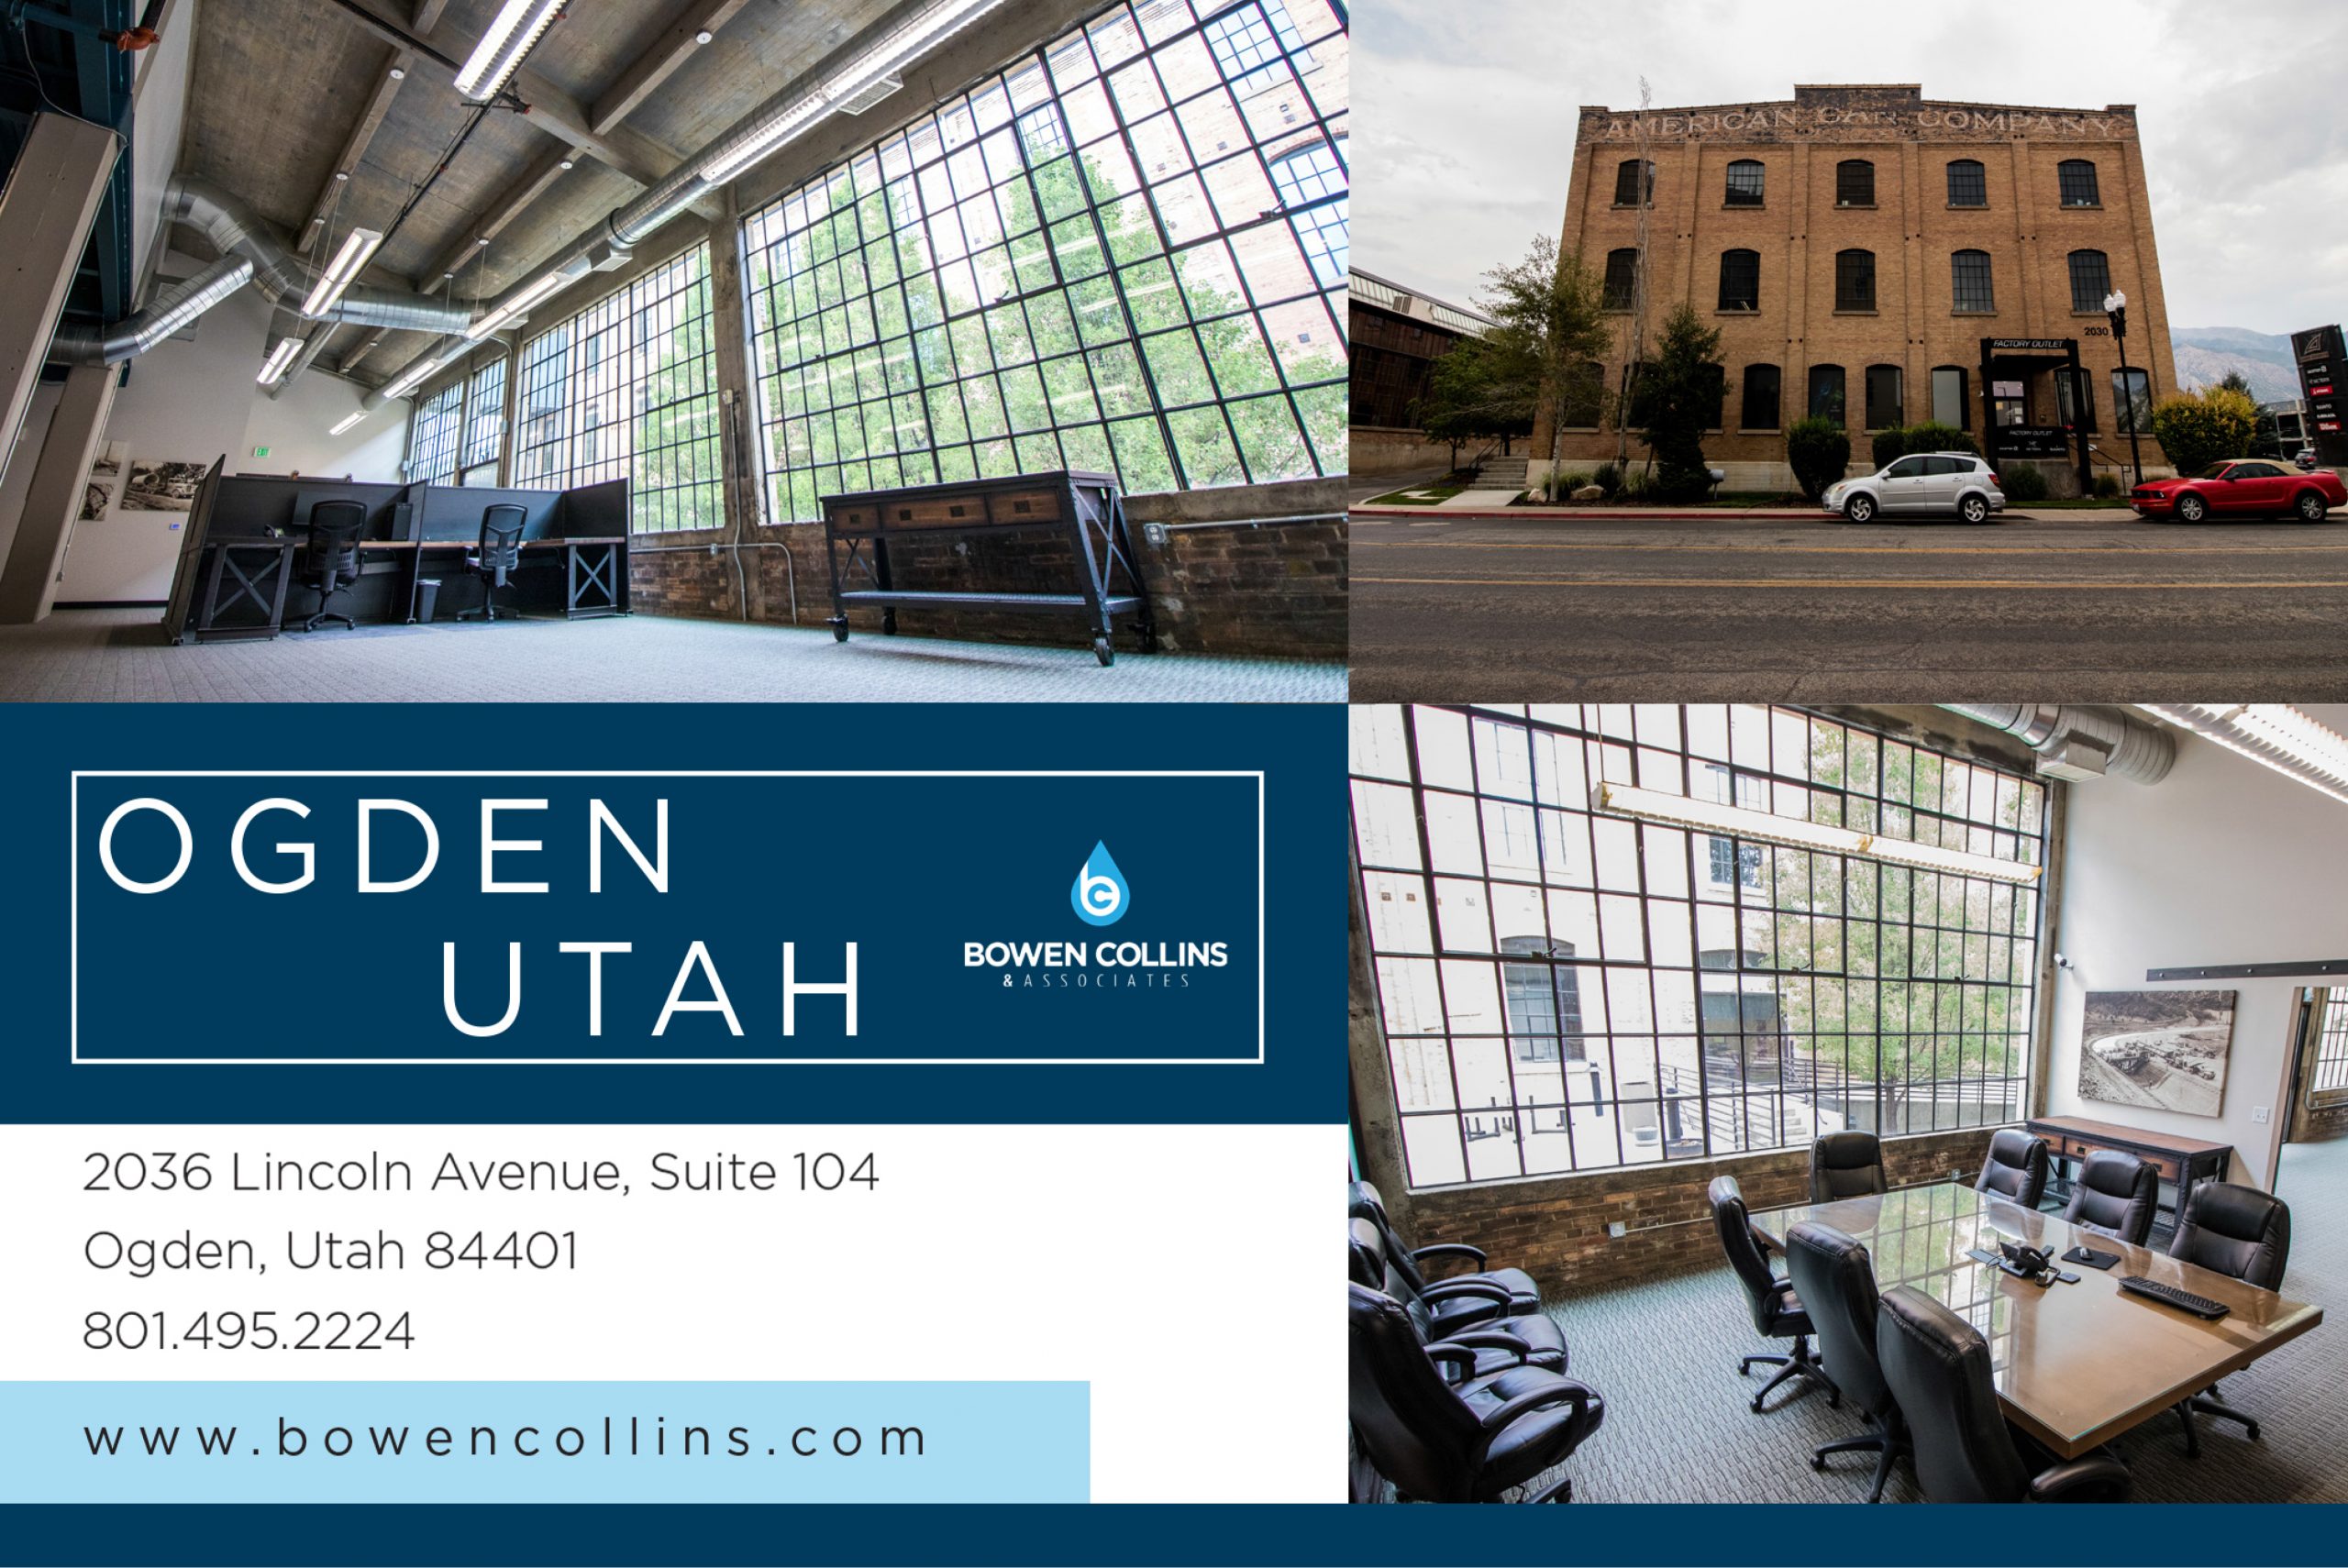 Compilation of photos showing Bowen Collins Ogden, Utah office with office info.